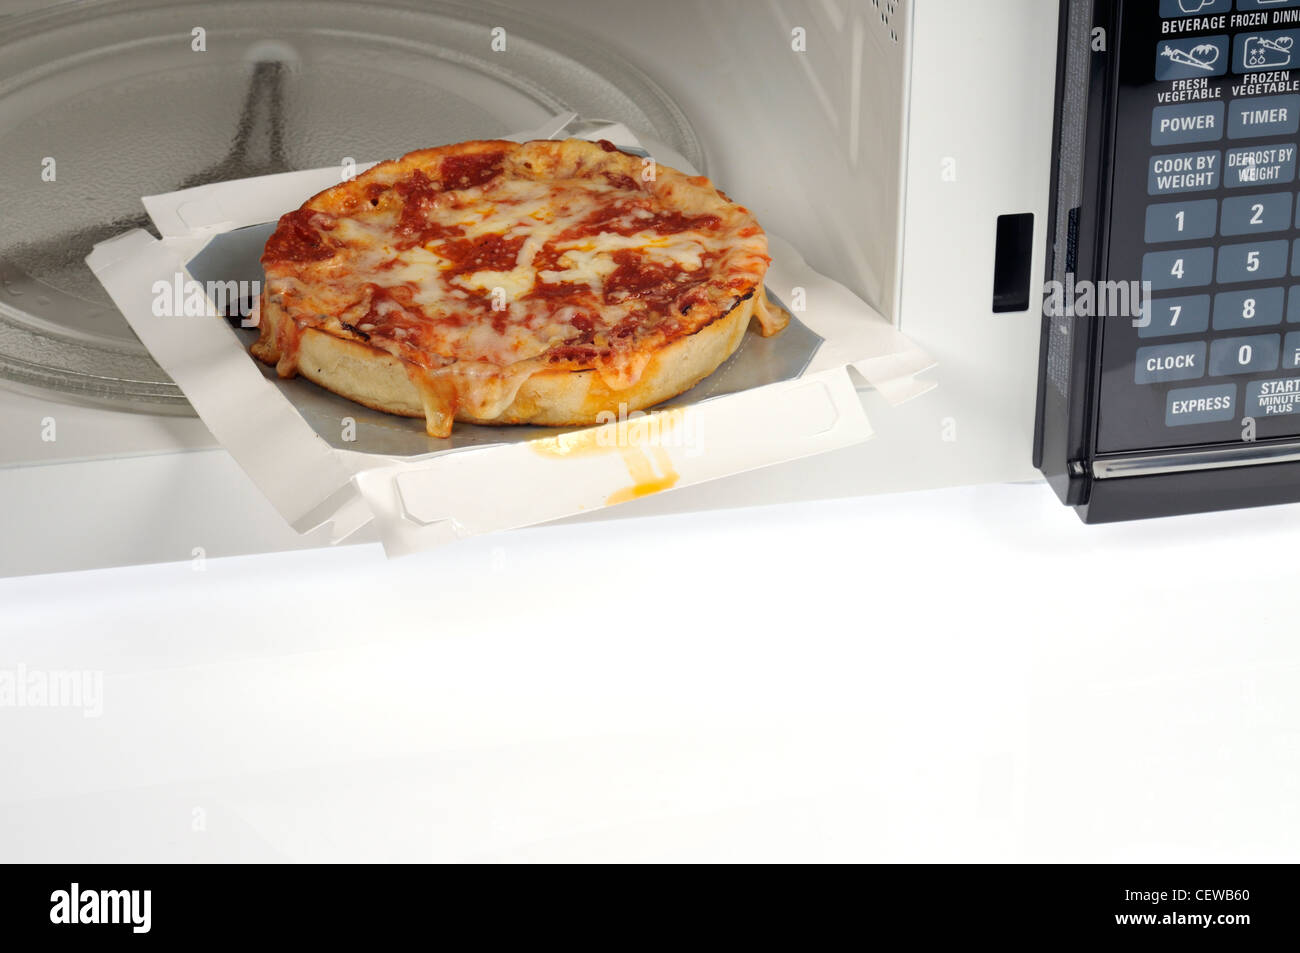 Microwave cooked single deep dish pizza with pepperoni topping in microwave oven Stock Photo